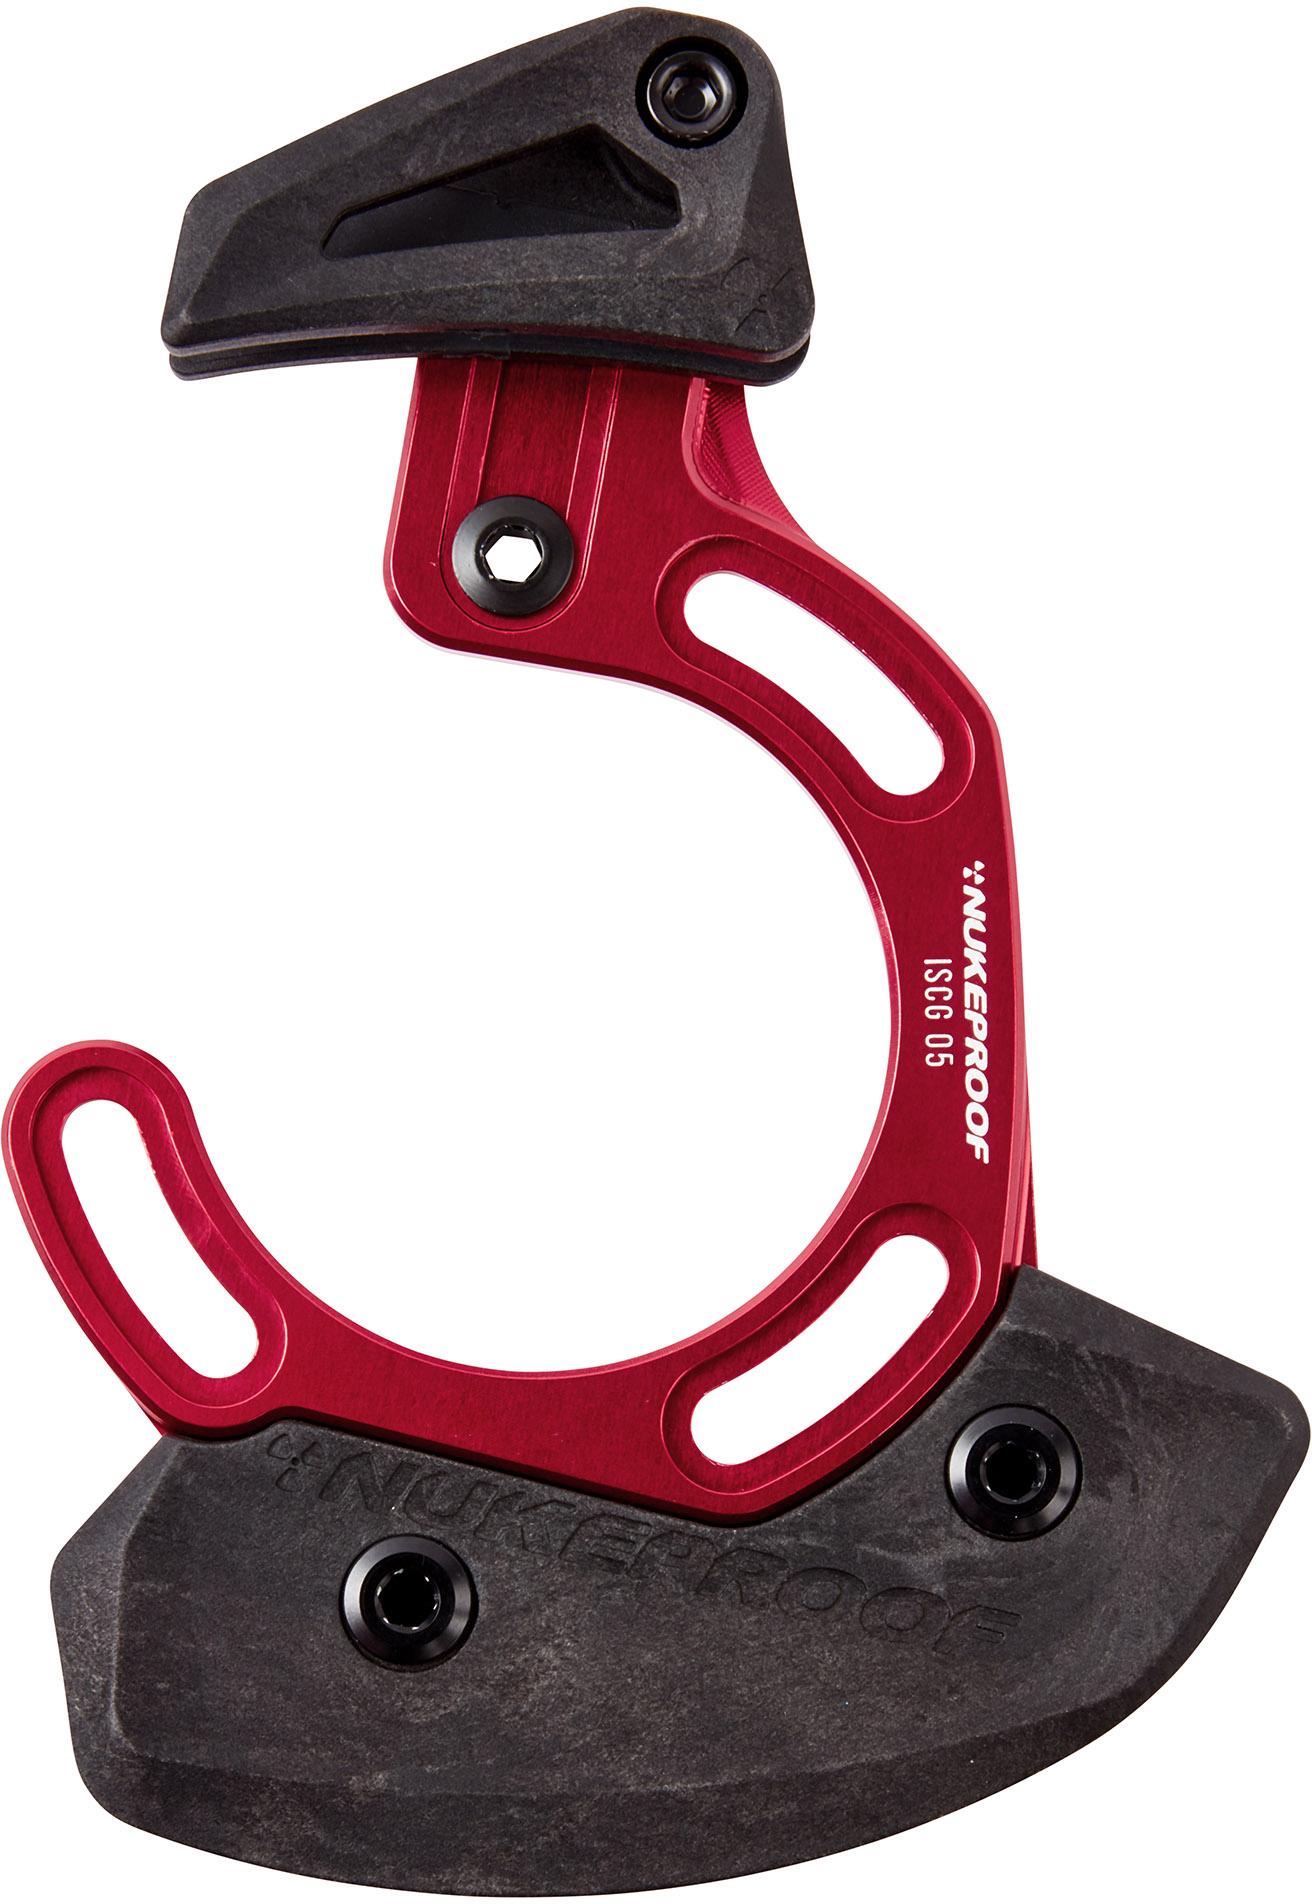 Nukeproof Chain Guide Iscg 05 Top Guide With Bash - Red -black